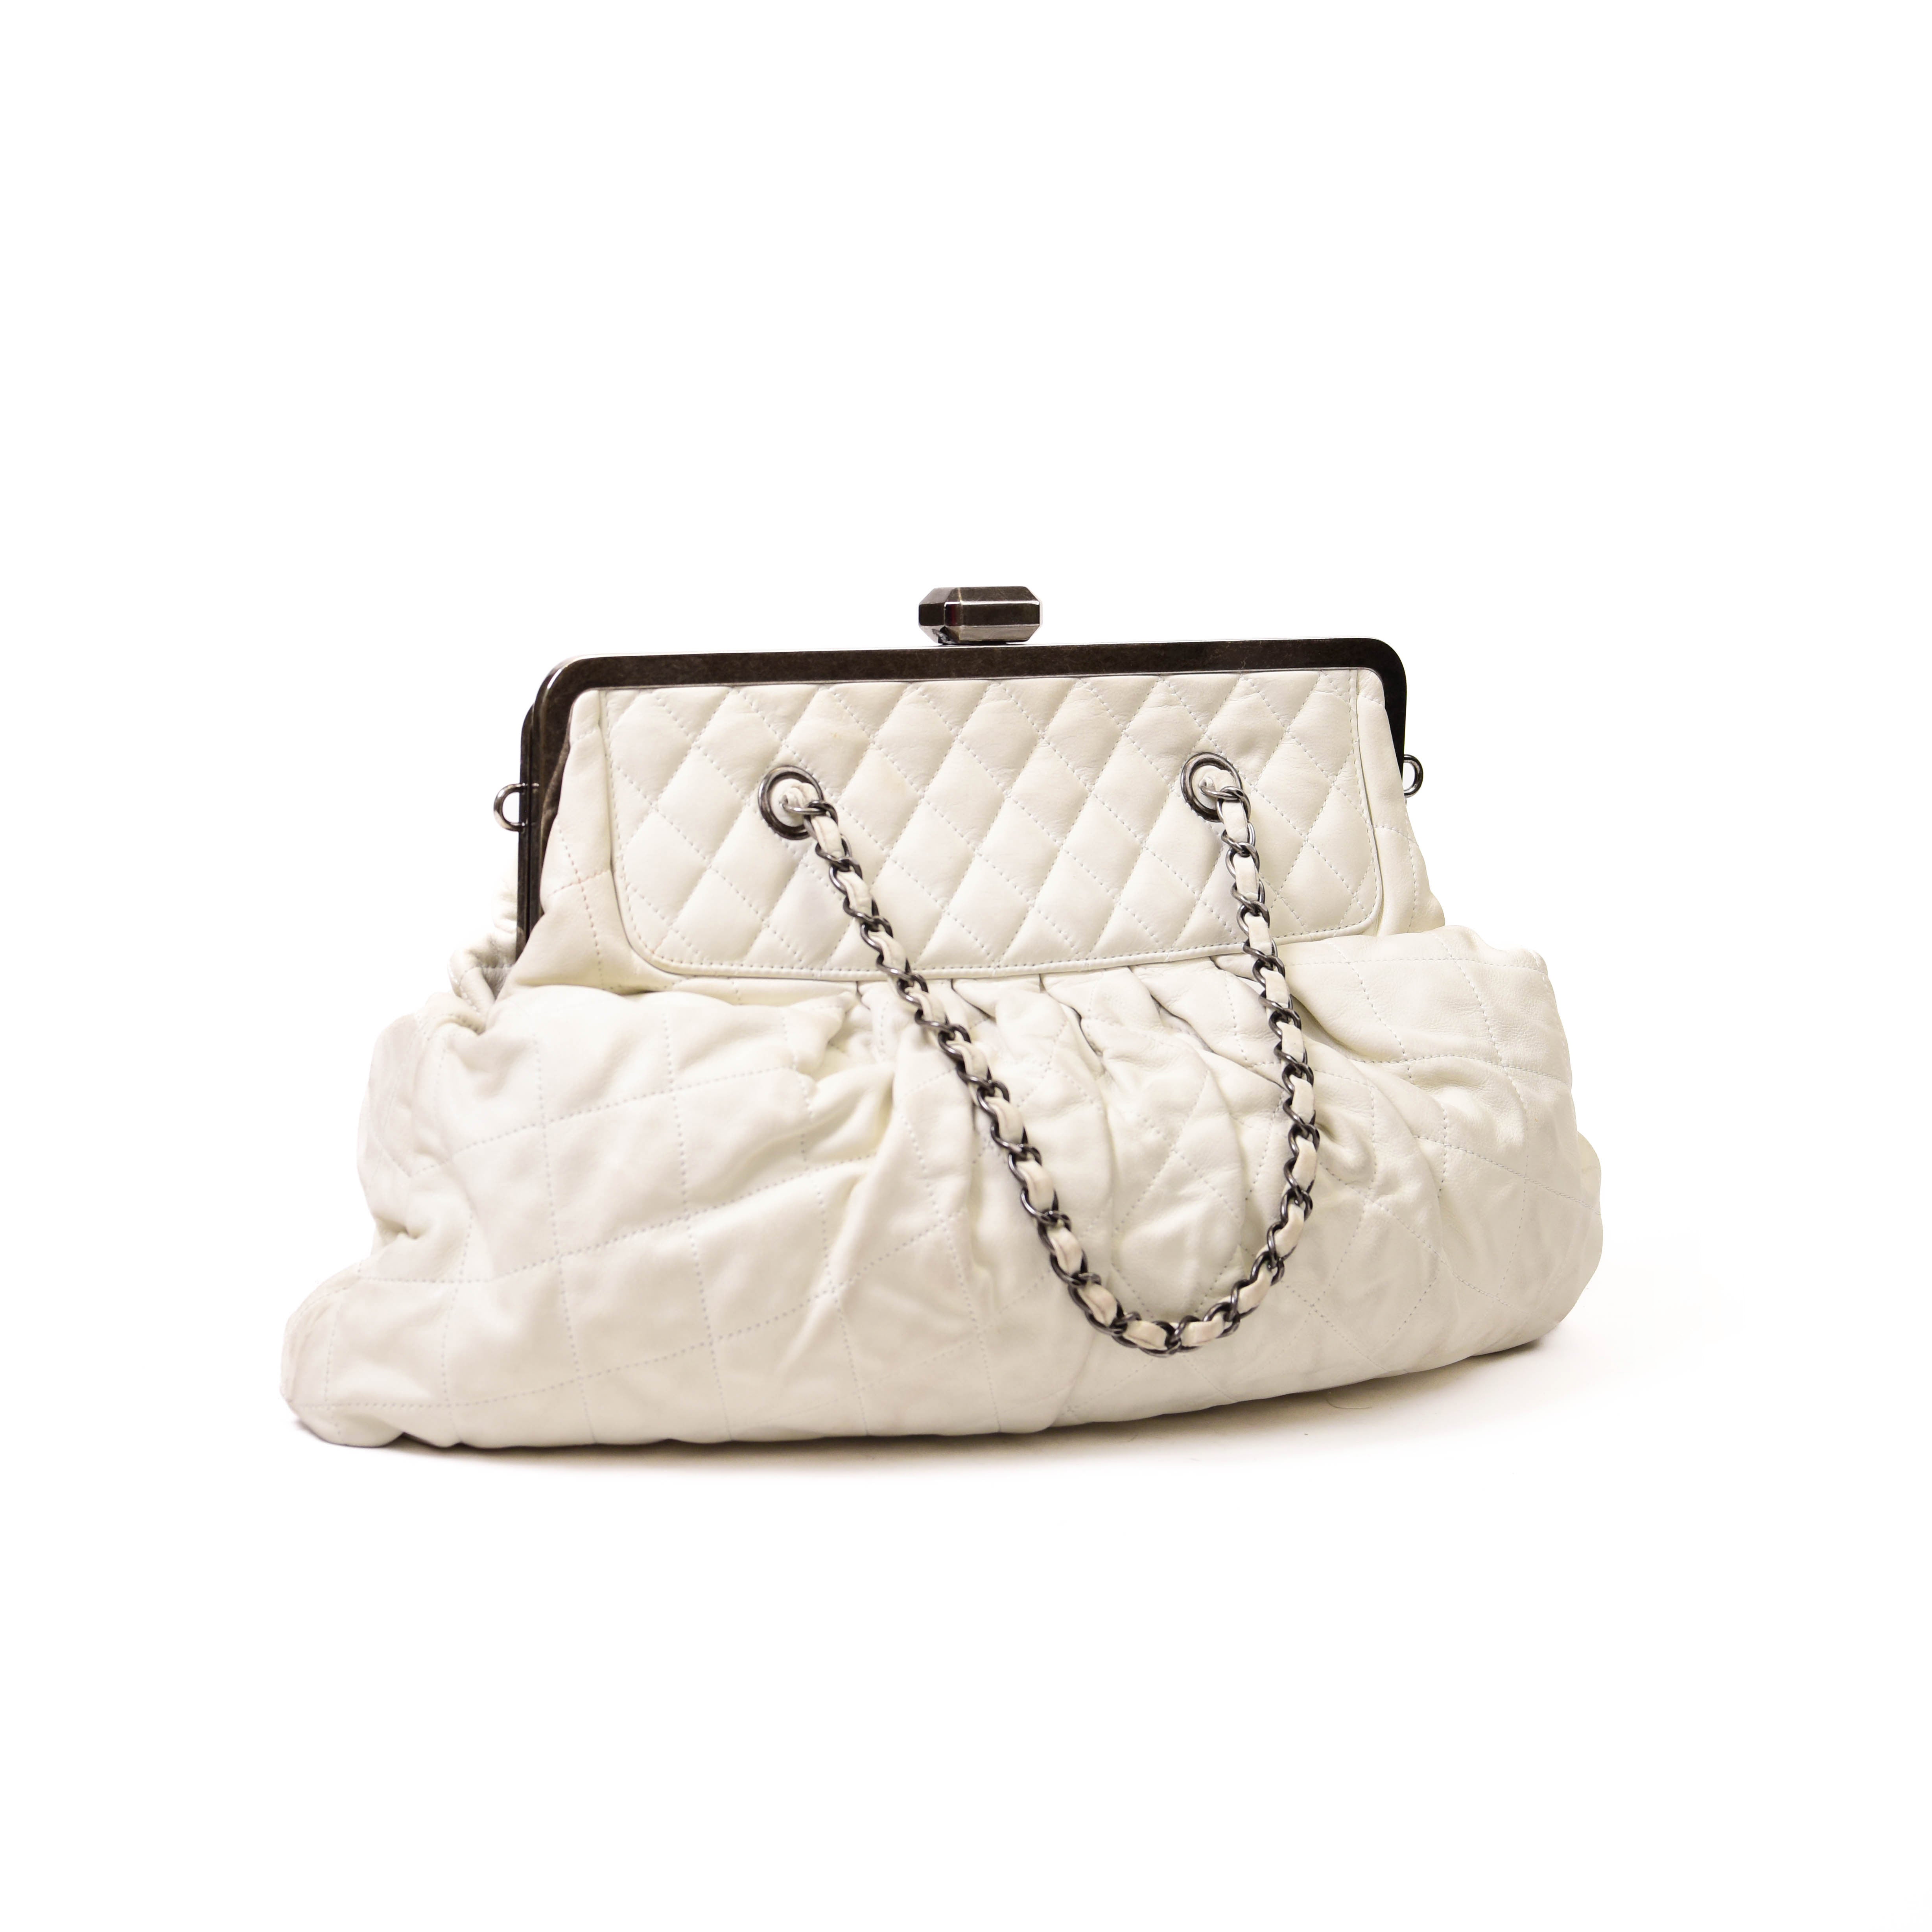 Chanel White Iridescent Calfskin Chic Quilt Frame Tote